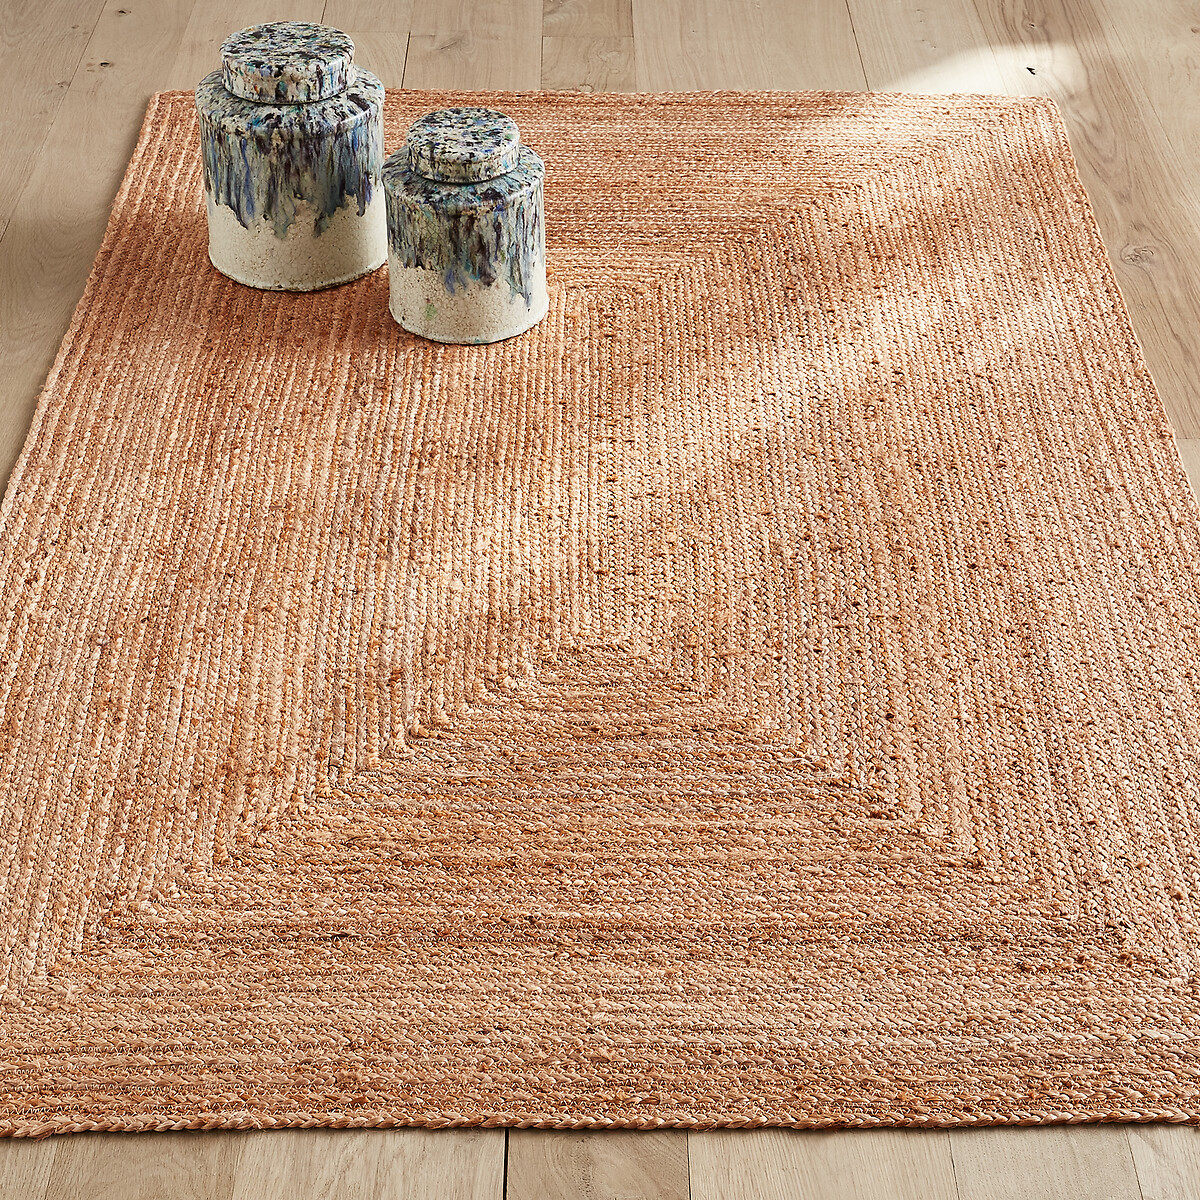 Hempy Hand Woven Jute Rug Natural Am Pm, What Are Jute Rugs Good For